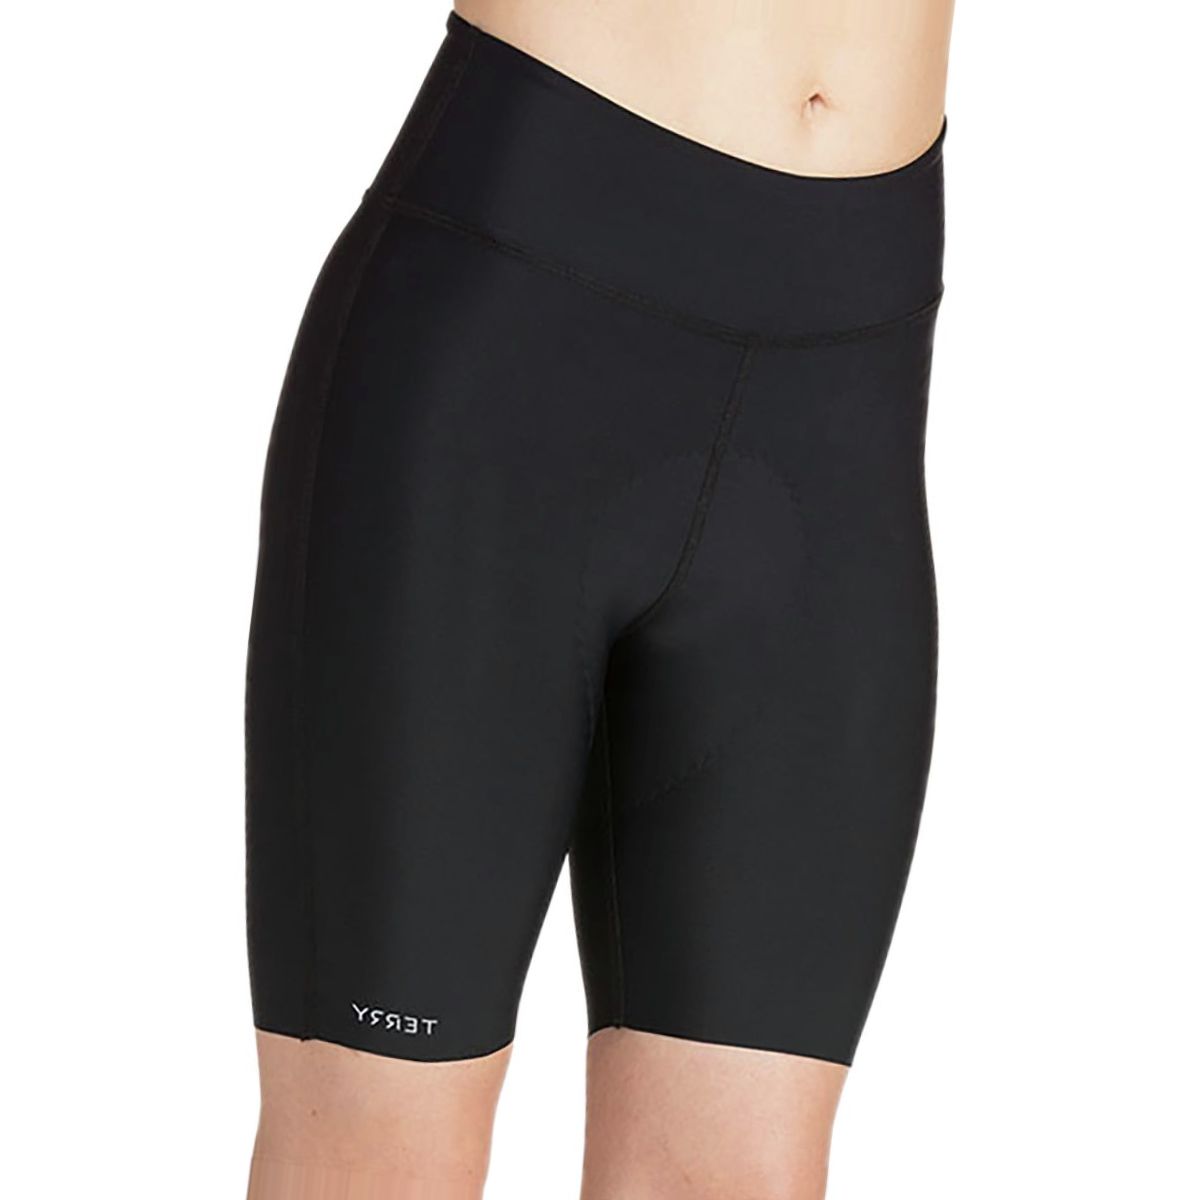 Terry Bicycles Chill 7in Short - Women's